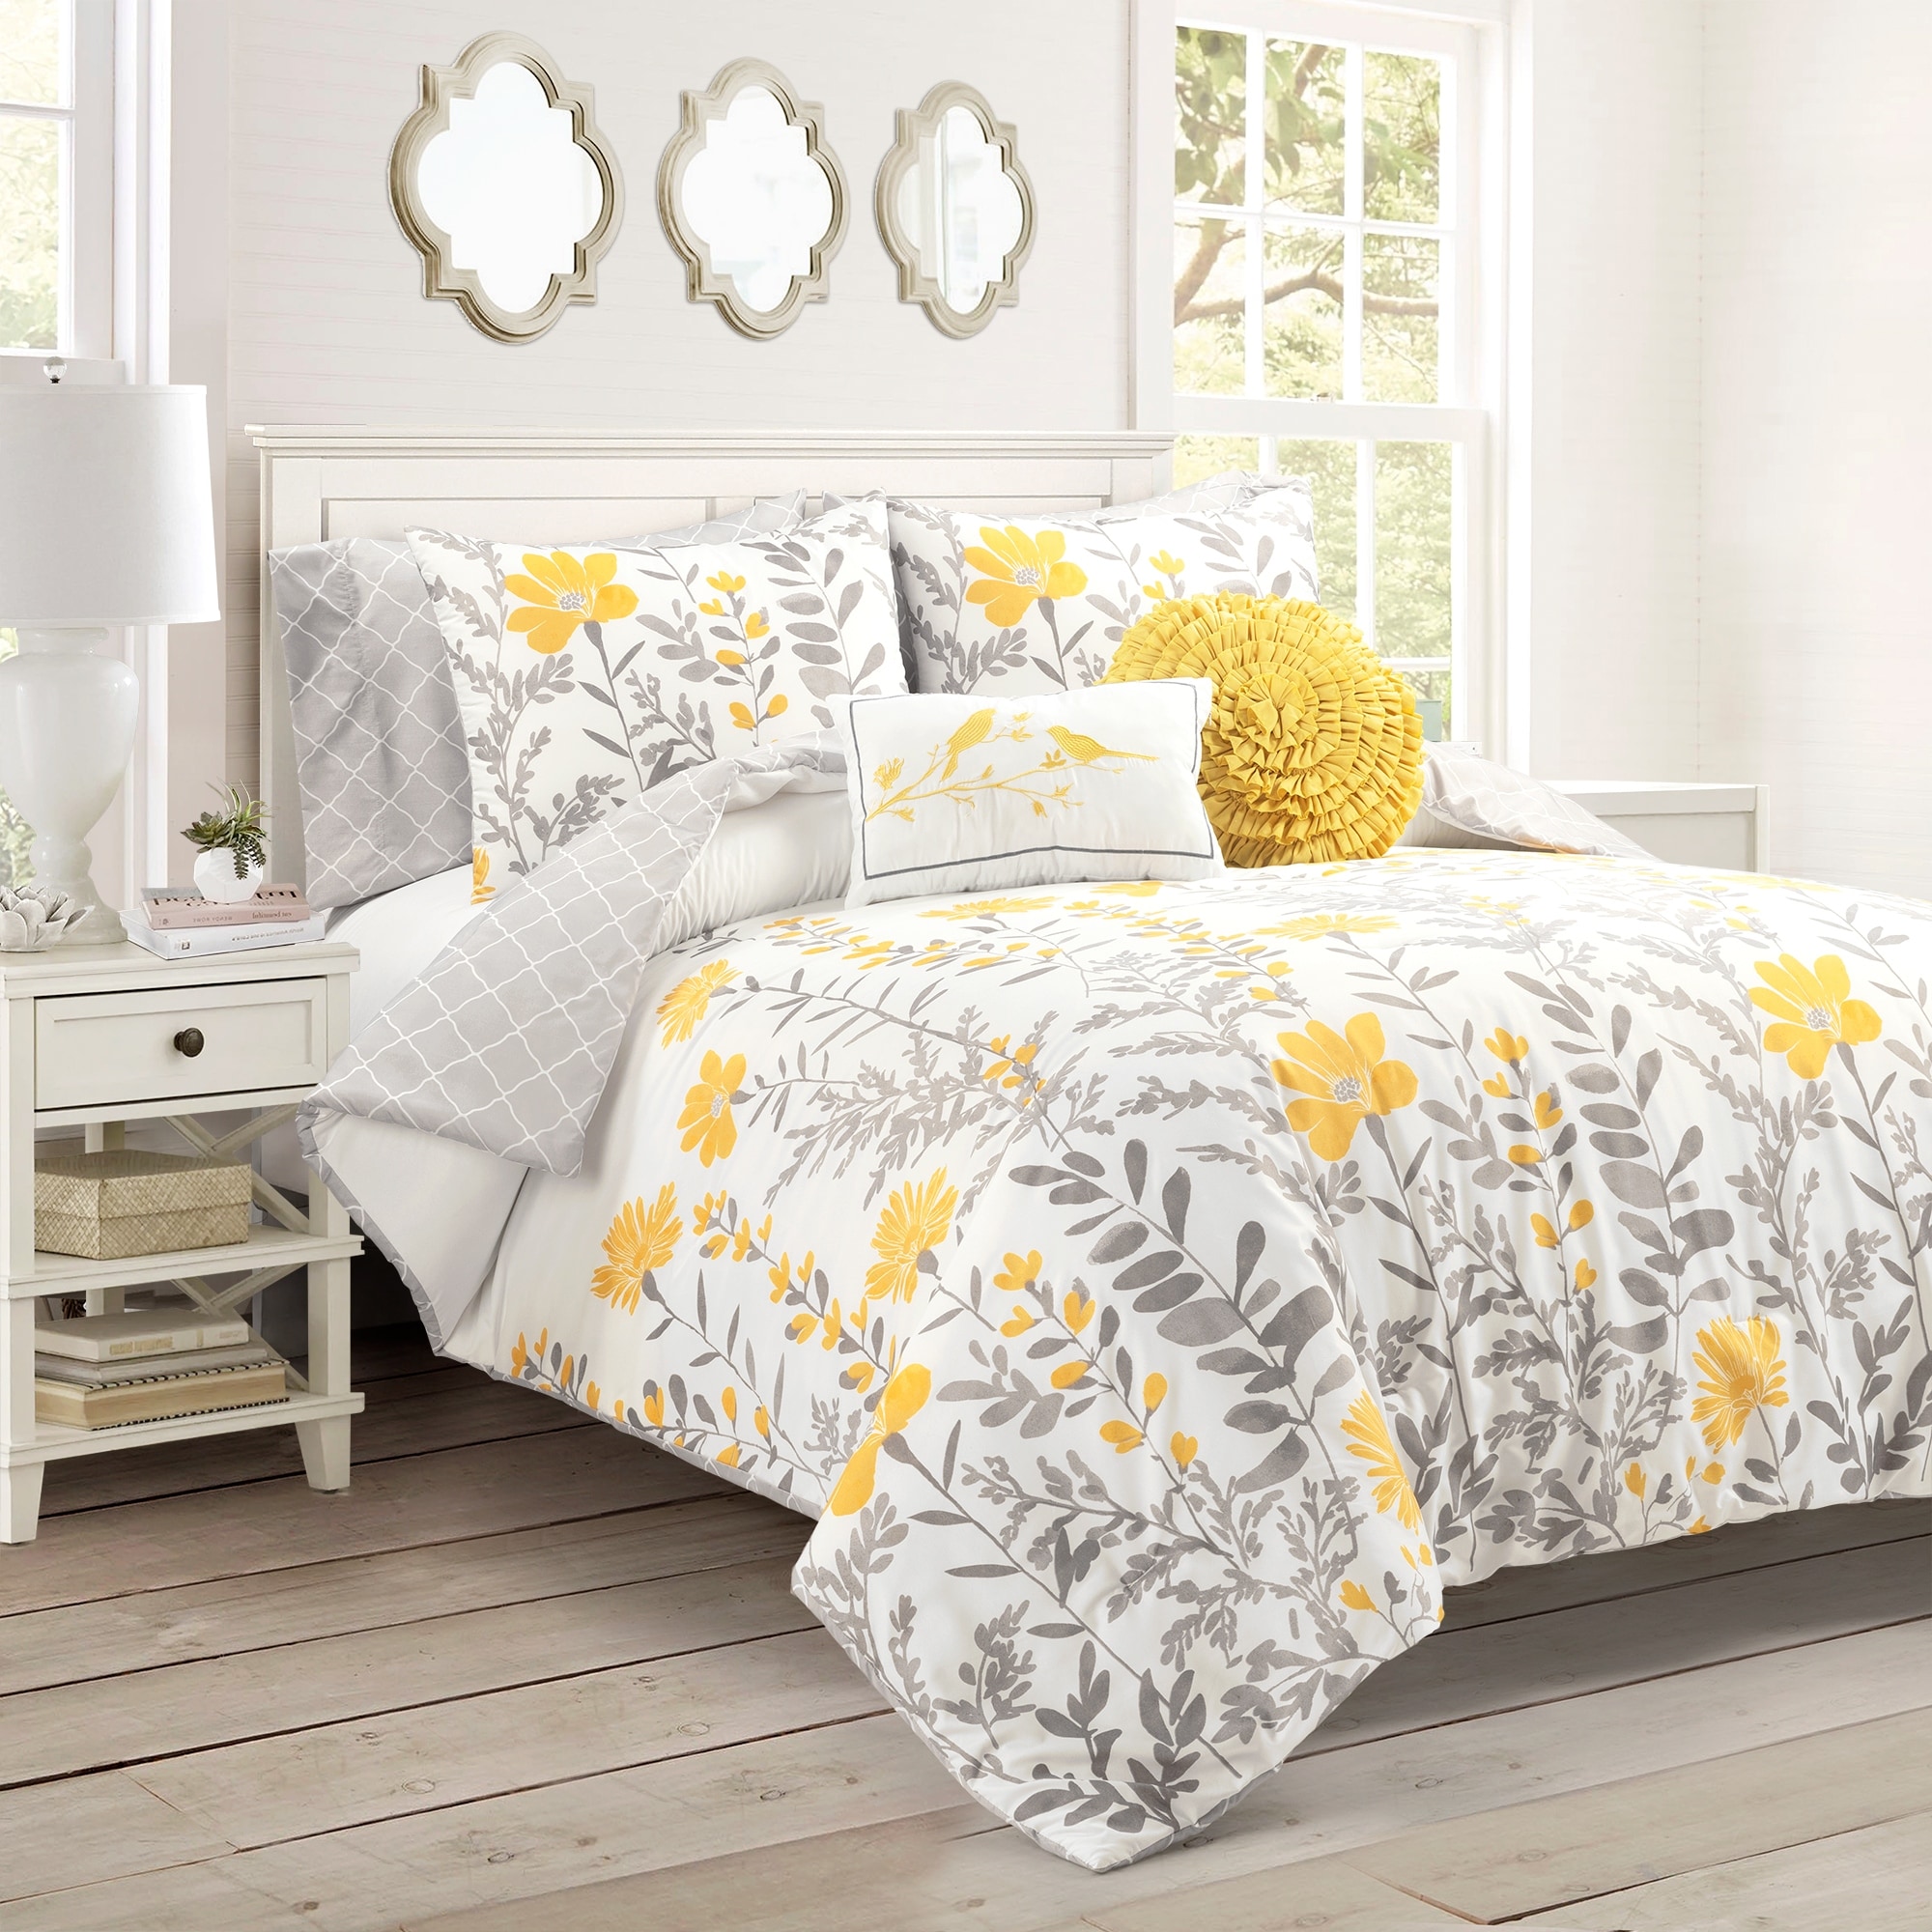 Grey Floral Comforters and Sets - Bed Bath & Beyond